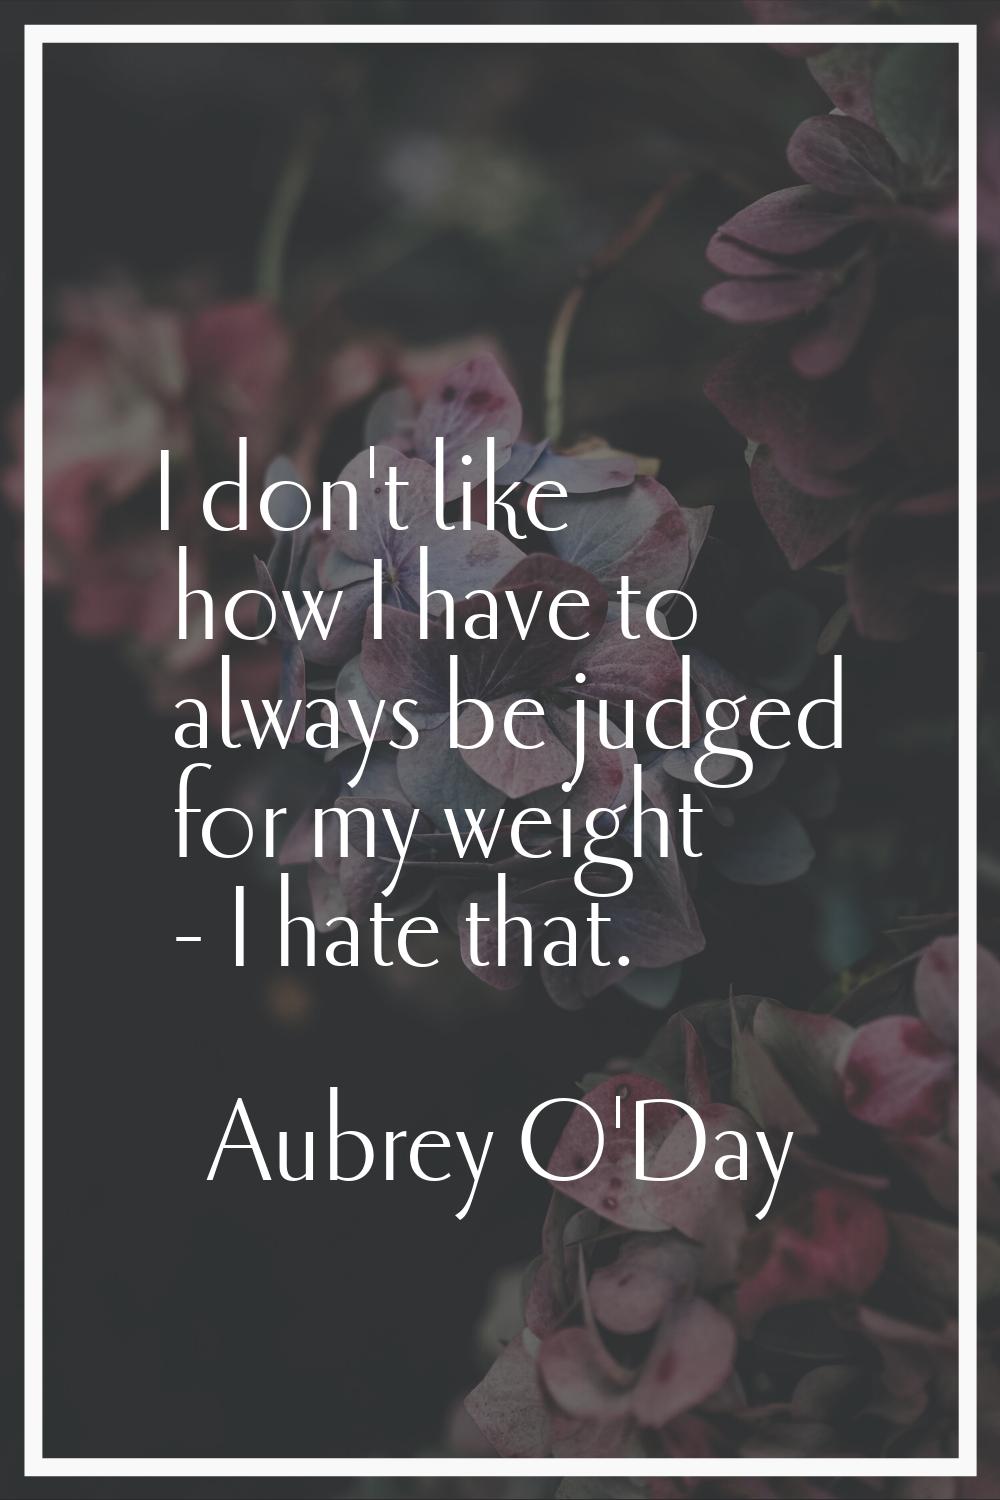 I don't like how I have to always be judged for my weight - I hate that.